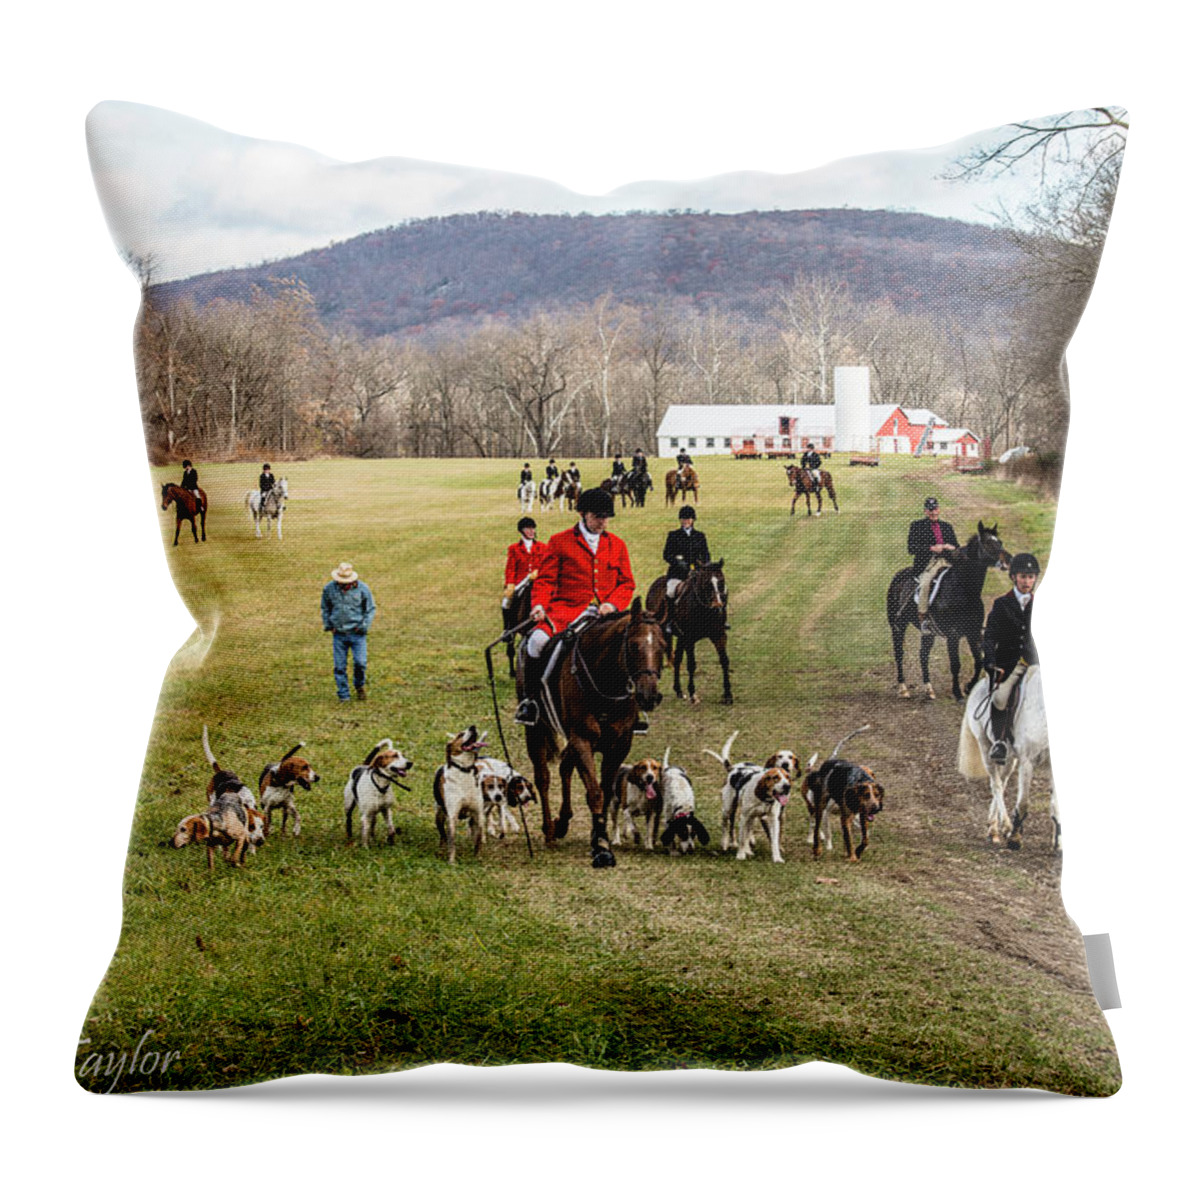 Foxhounds Throw Pillow featuring the photograph Chamberlain's 21 by Pamela Taylor